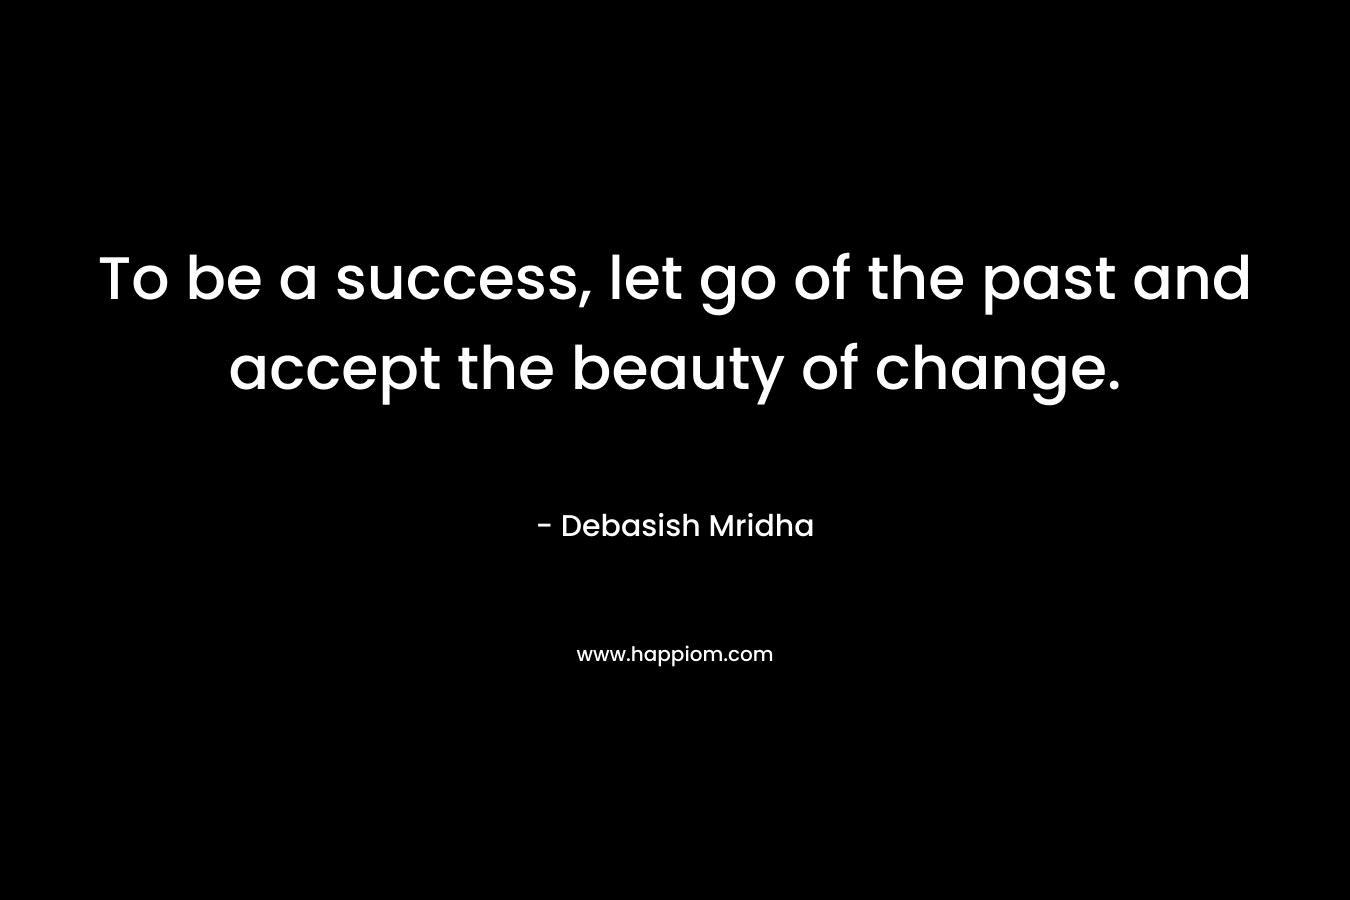 To be a success, let go of the past and accept the beauty of change.